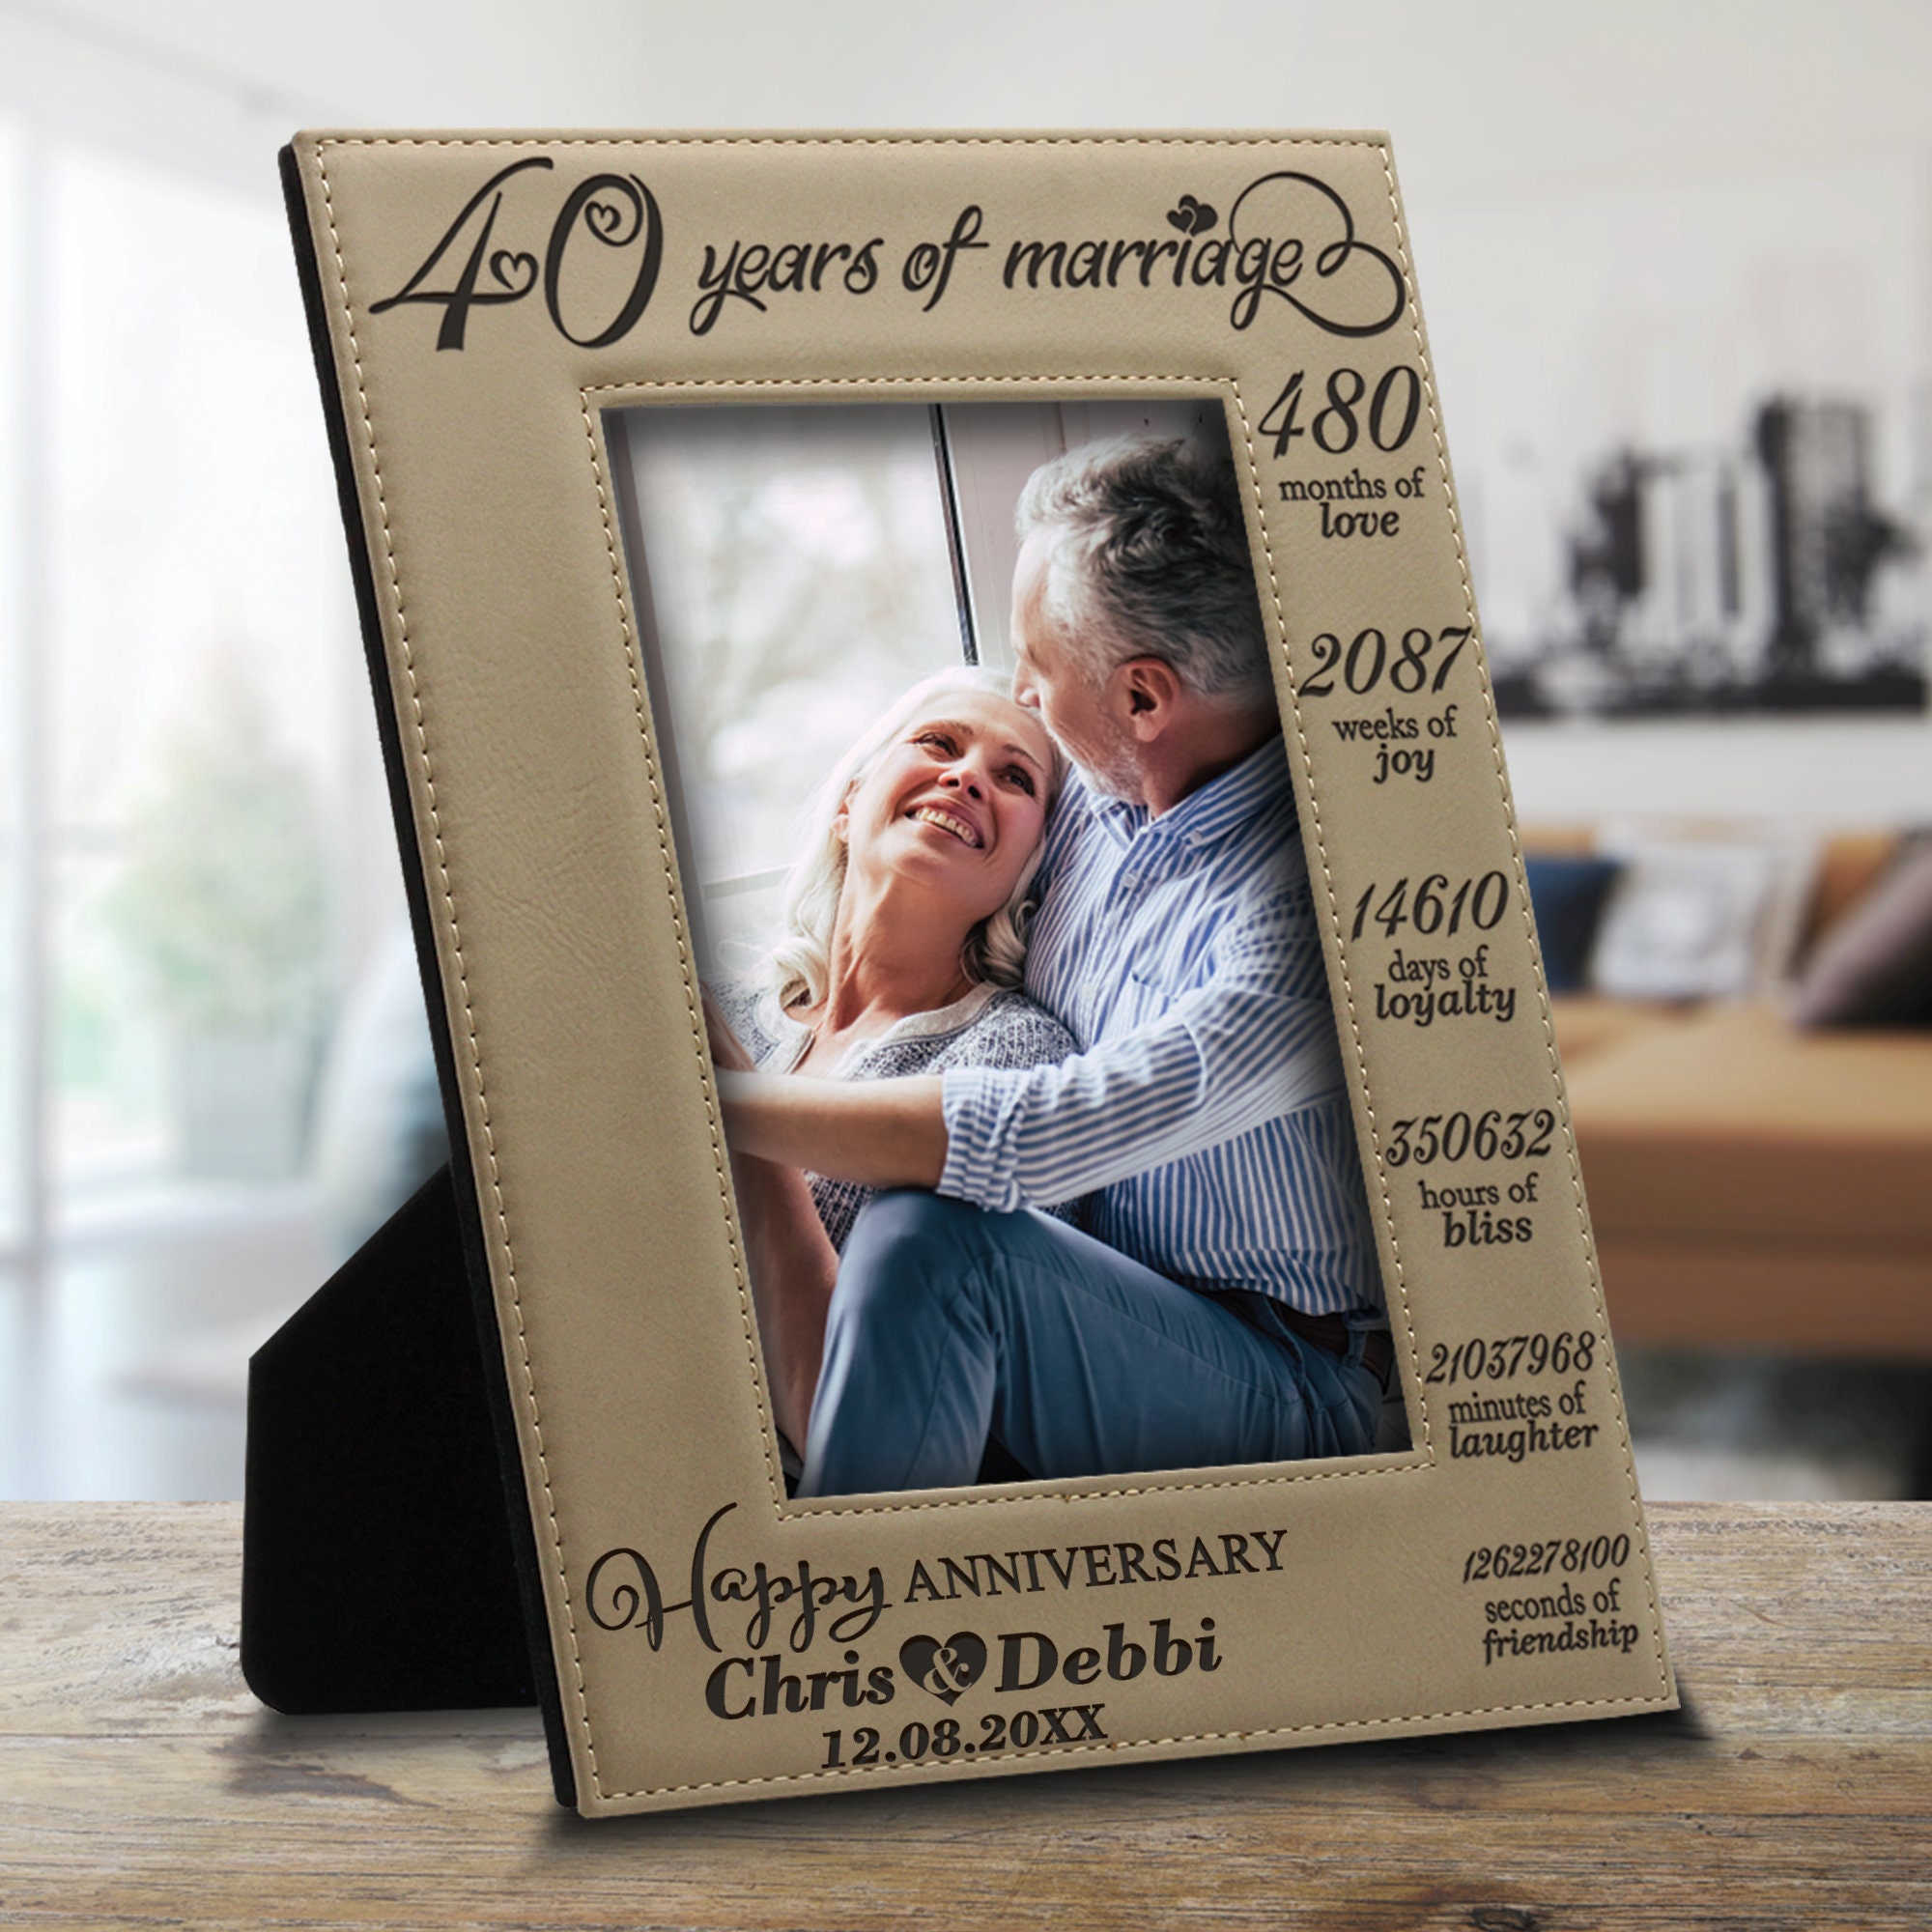 Happy anniversary couple 40 Years of marriage engraved Leather Picture frame 